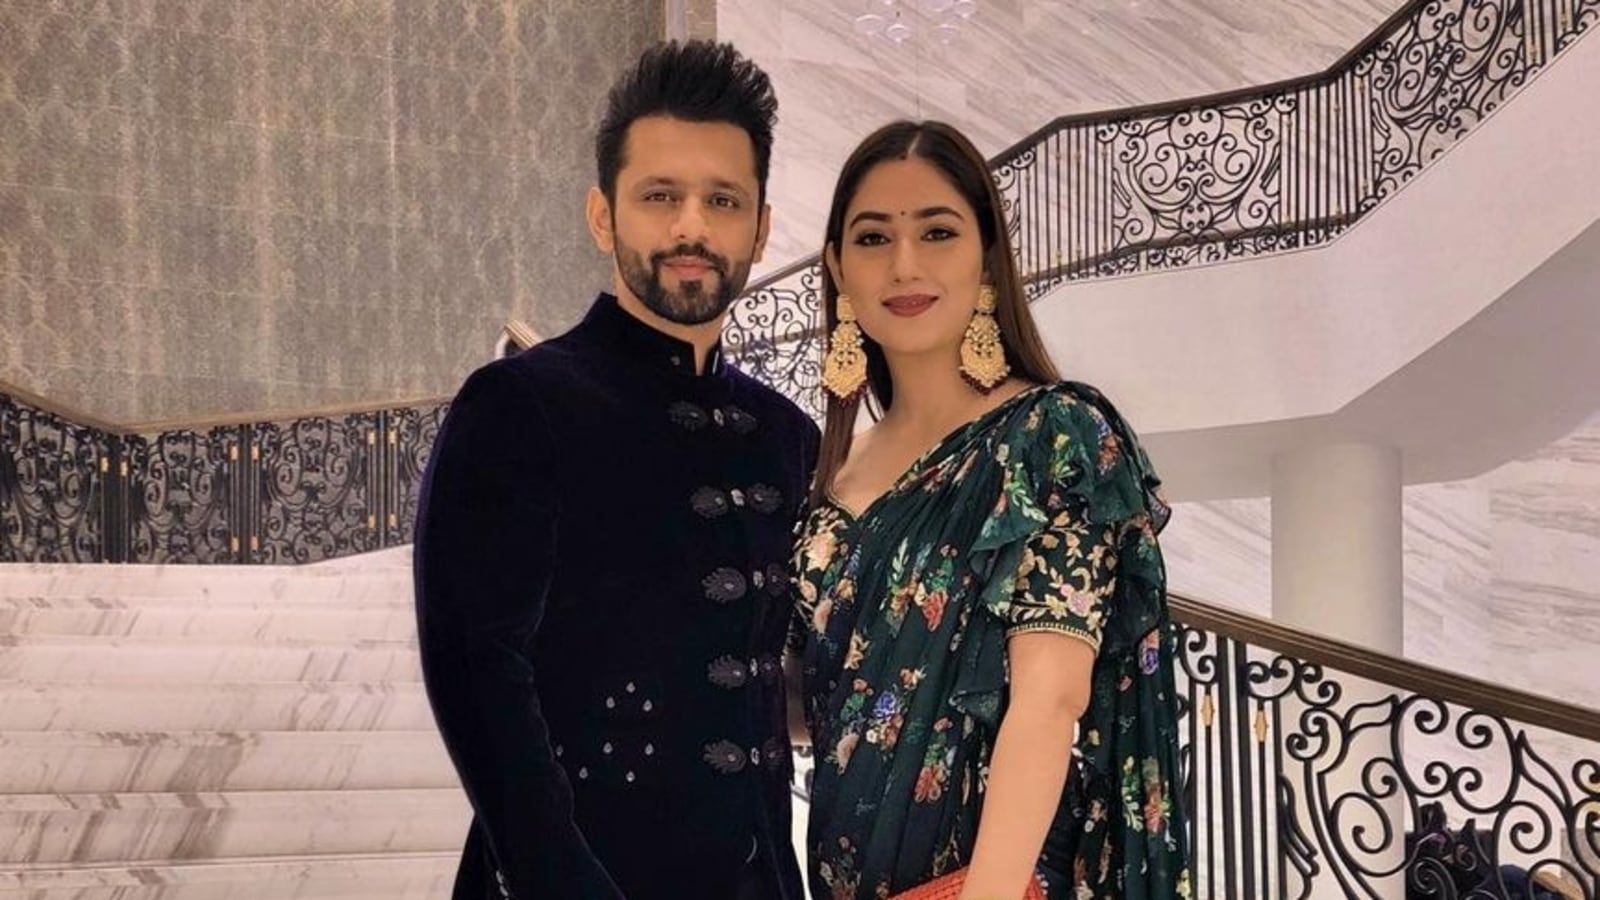 Rahul Vaidya gets a look from Disha Parmar for joking he wants a baby ‘tomorrow’: ‘I have been working hard also’